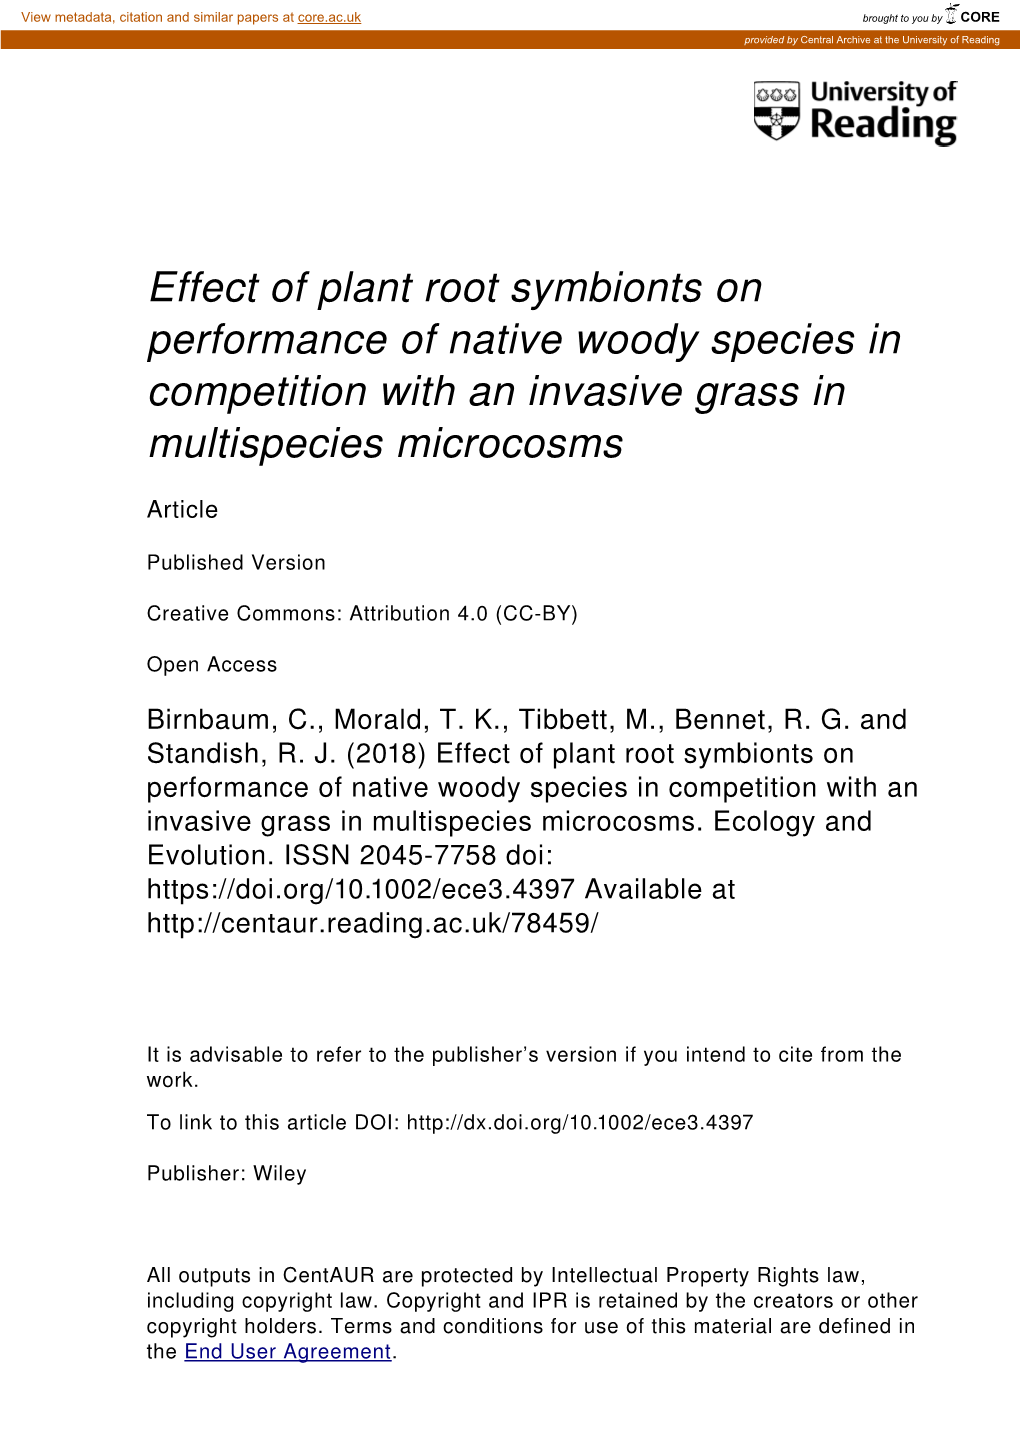 Effect of Plant Root Symbionts on Performance of Native Woody Species in Competition with an Invasive Grass in Multispecies Microcosms